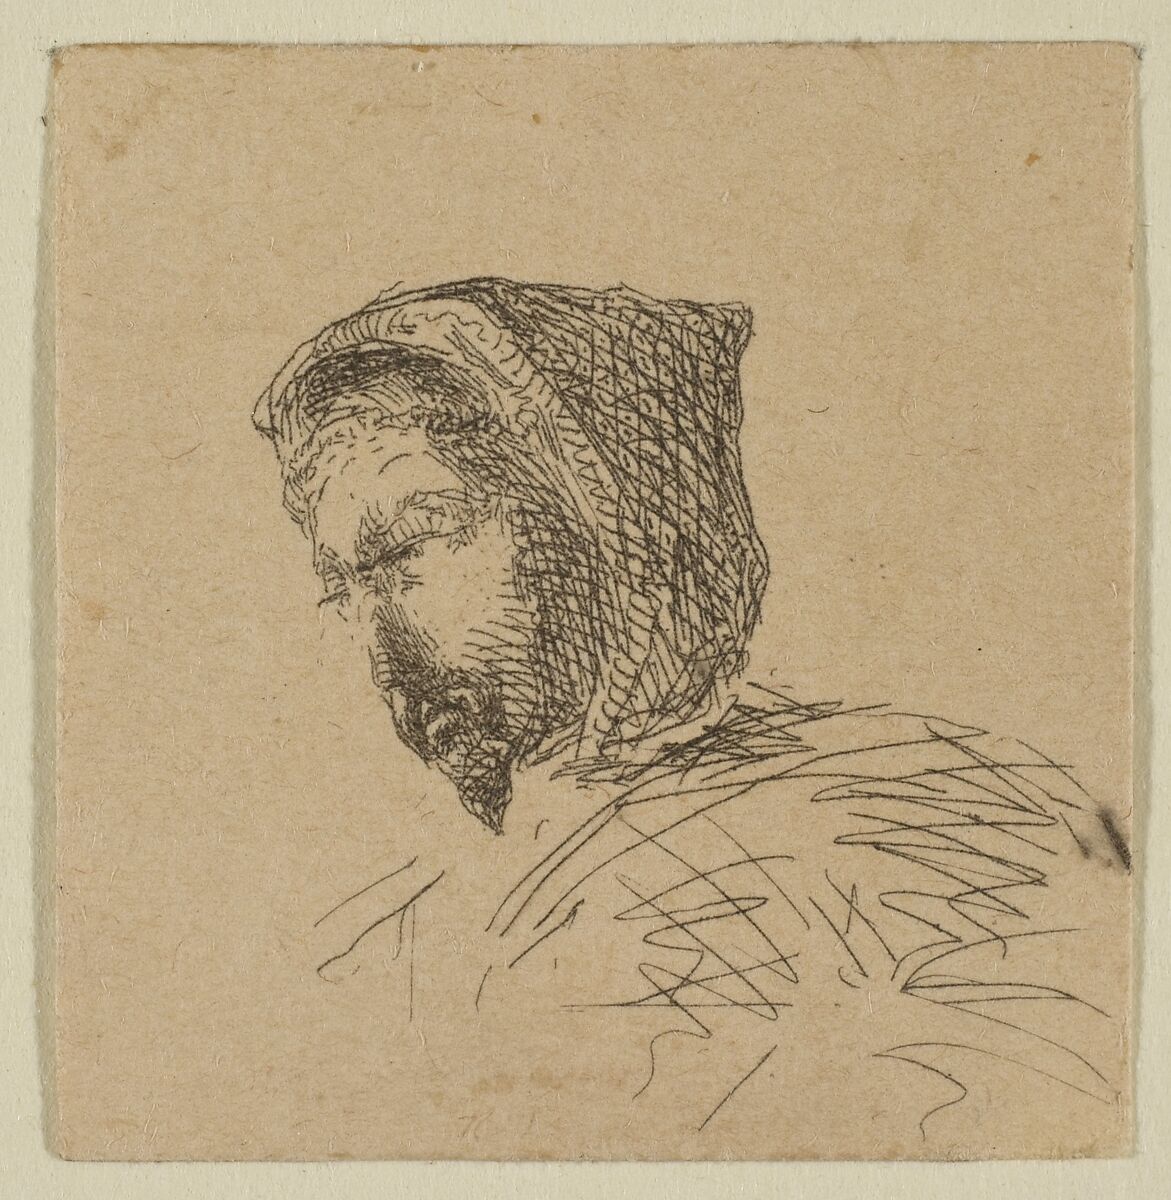 Hooded Male Head (from Sketches on The Coast Survey Plate), James McNeill Whistler (American, Lowell, Massachusetts 1834–1903 London), Etching; proof impression of the only state (Glasgow 1); this is a fragment cut from the upper portion of "Sketches on the Coast Survey Plate" (Kennedy no. 1) by Whistler and mounted on a board with six other related fragments. Cited by Glasgow as the earliest known impression. 